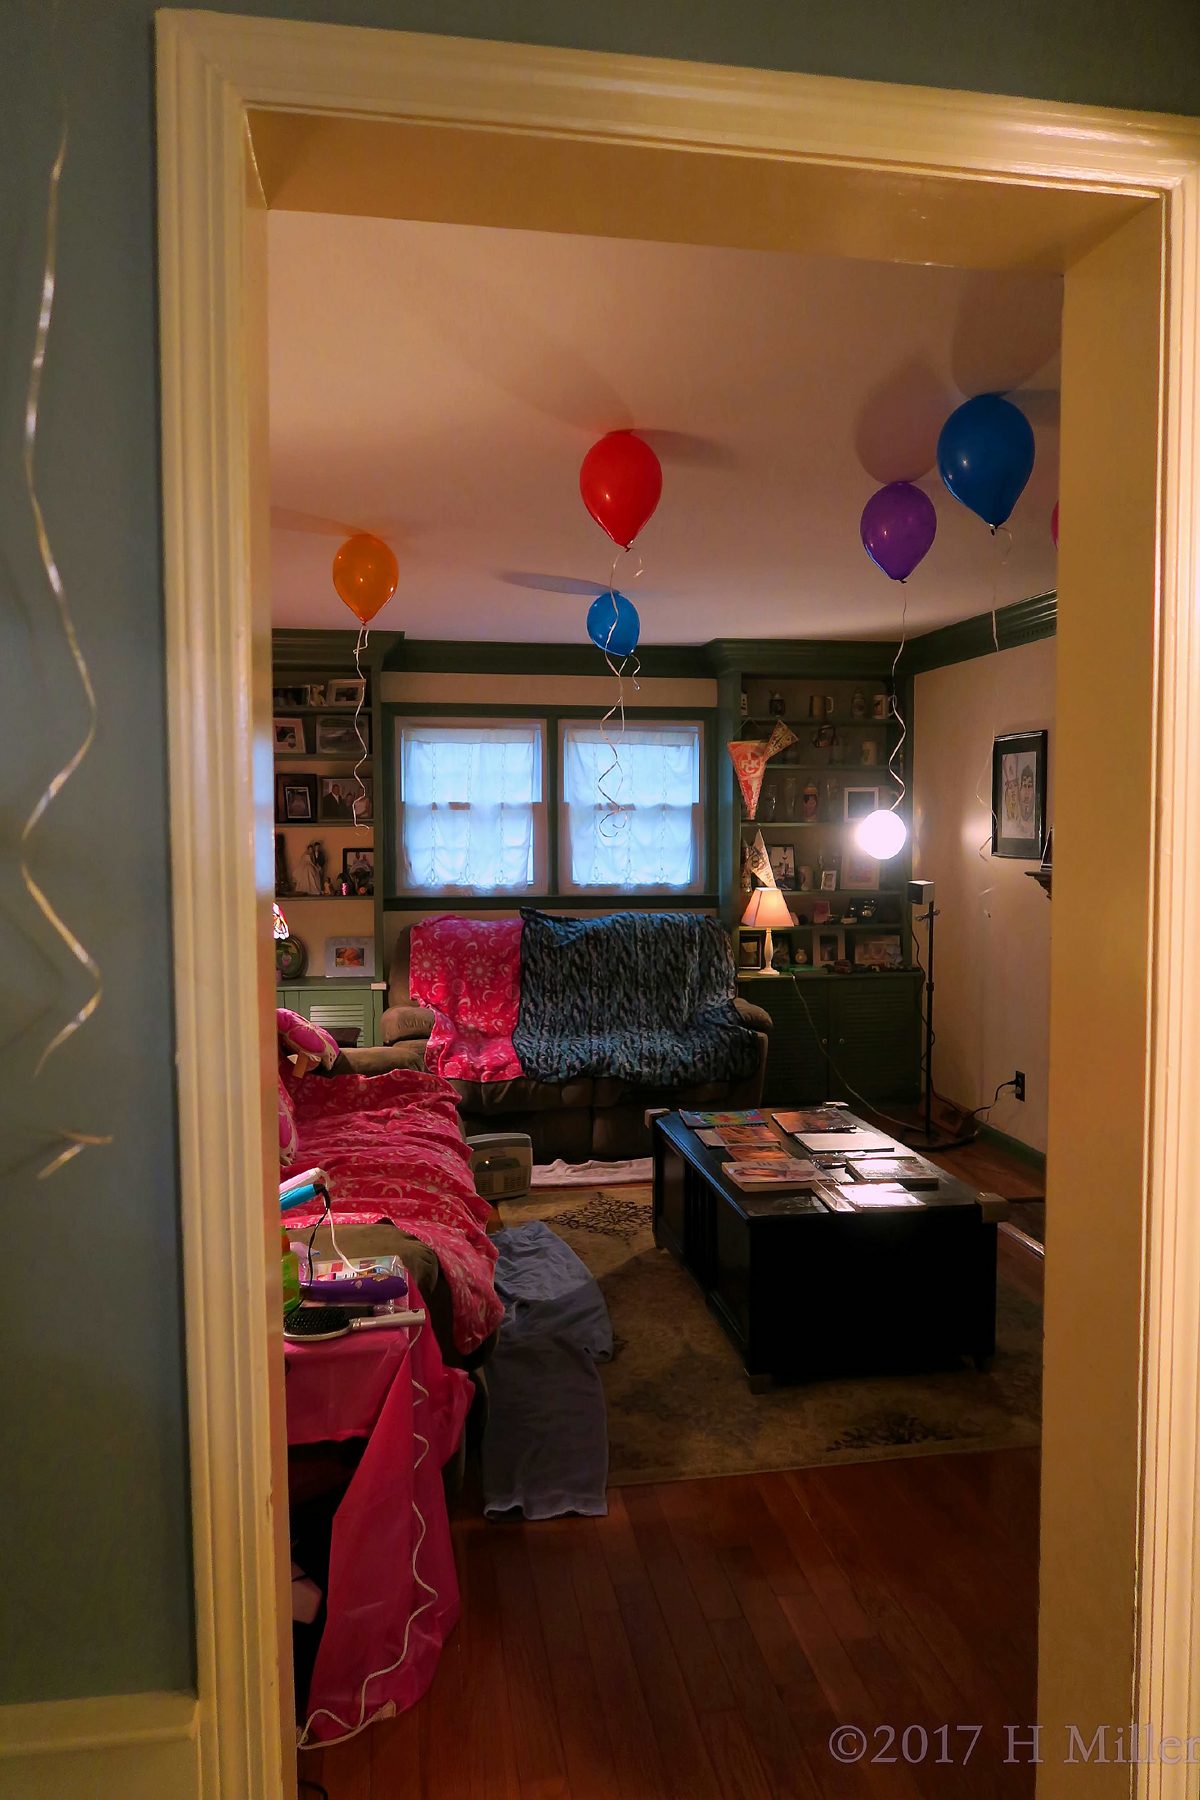 Balloons Mean Birthday Party Time! 